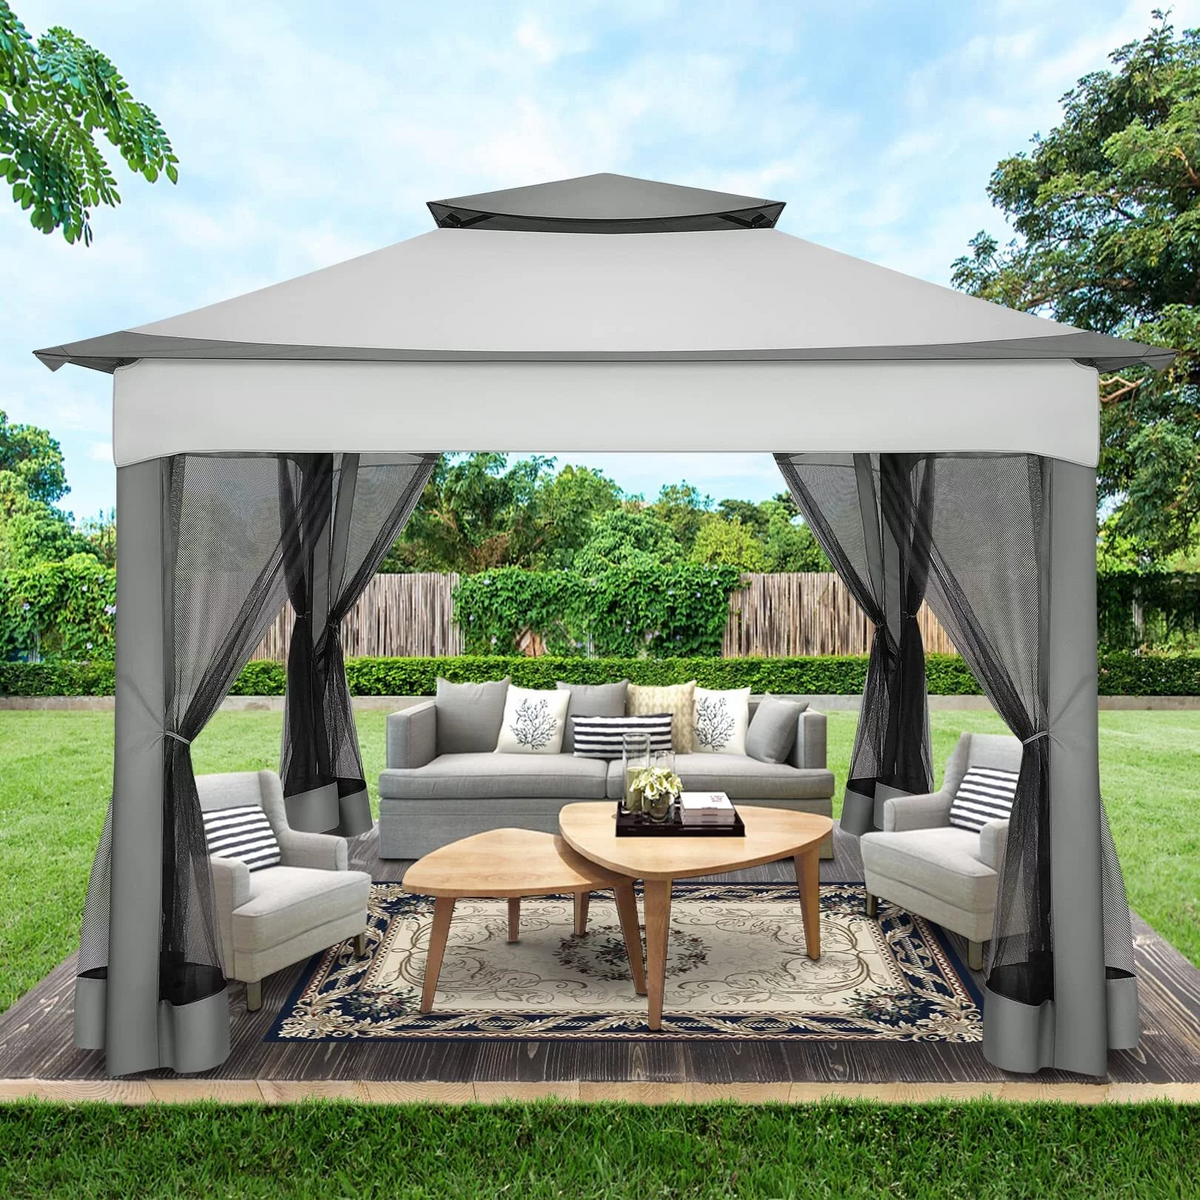 COBIZI Outdoor Canopy Gazebo 11x11 Pop Up Gazebo Patio Gazebo with Mosquito Netting Outdoor Canopy Shelter with 121 Square Feet of Shade for Outdoor Lawn, Garden, Backyard and Deck, Gray